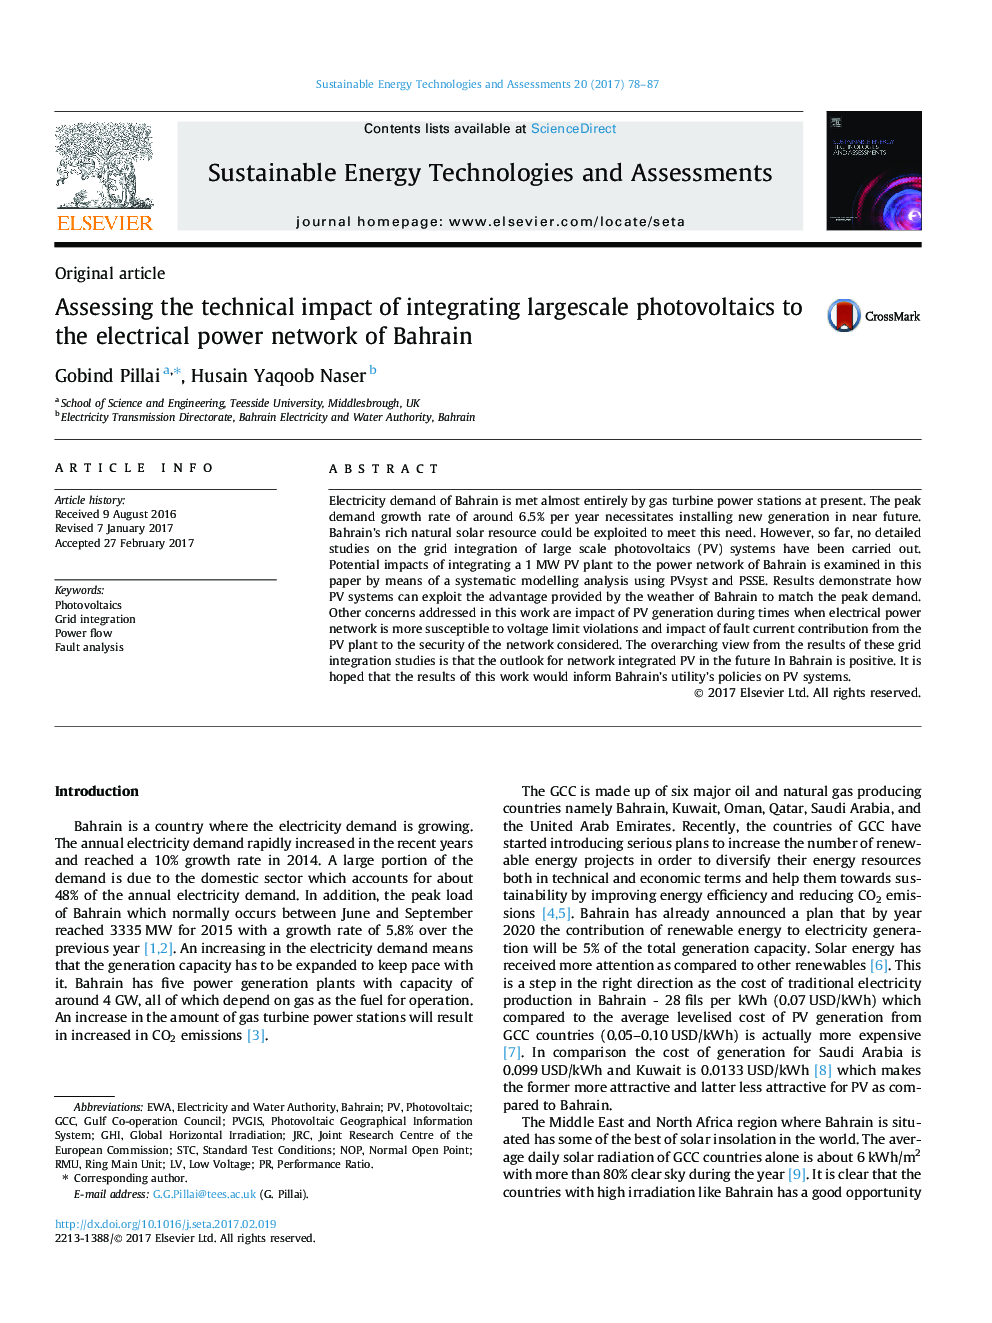 Assessing the technical impact of integrating largescale photovoltaics to the electrical power network of Bahrain